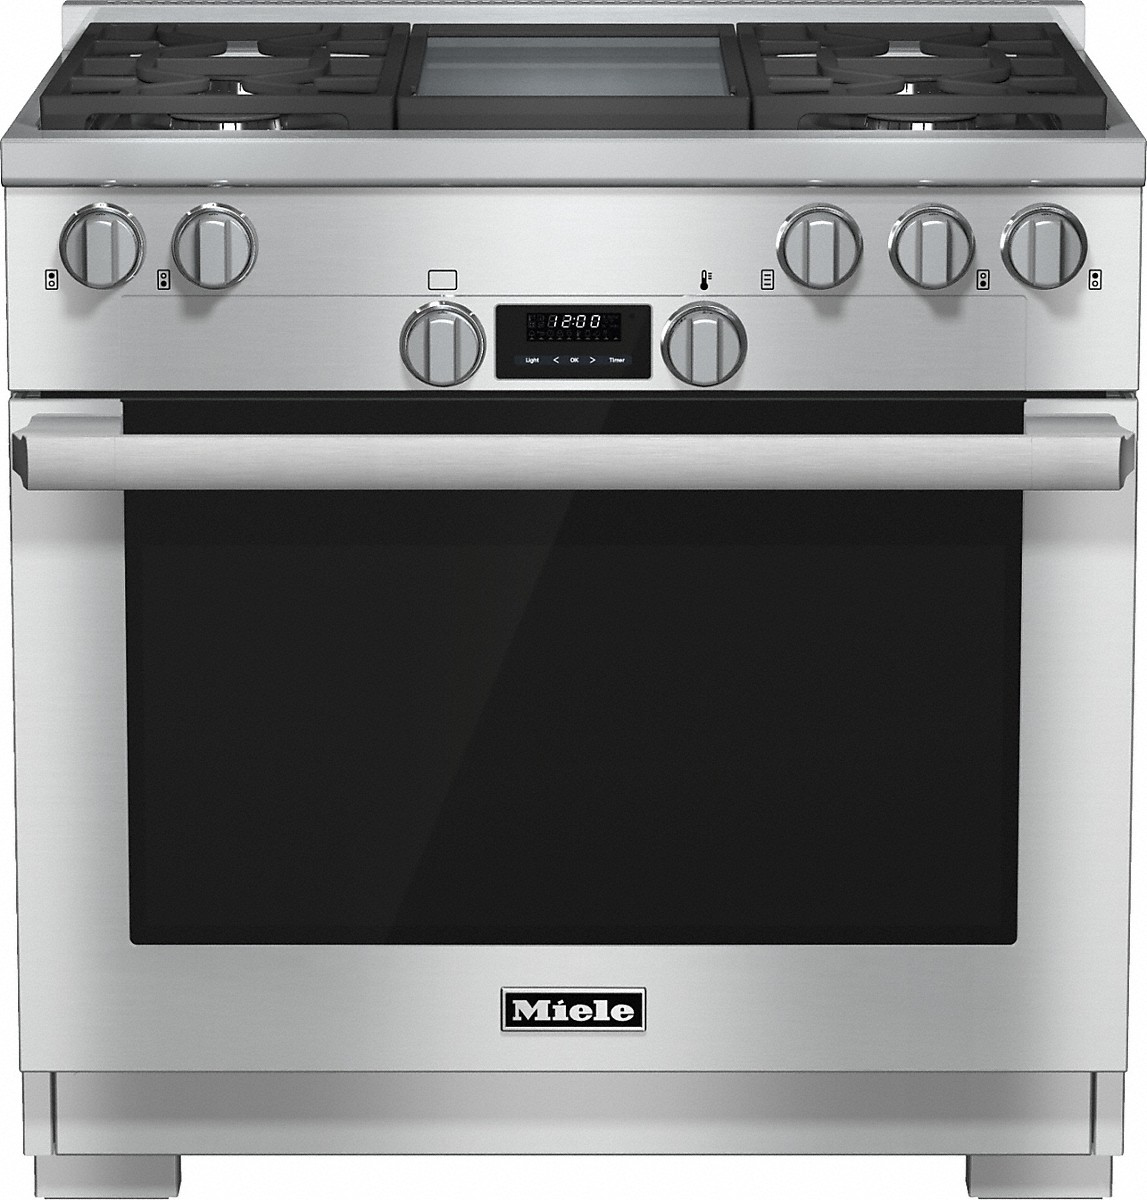 Miele - 5.8 cu. ft  Gas Range in Stainless - HR 1136-1 LP